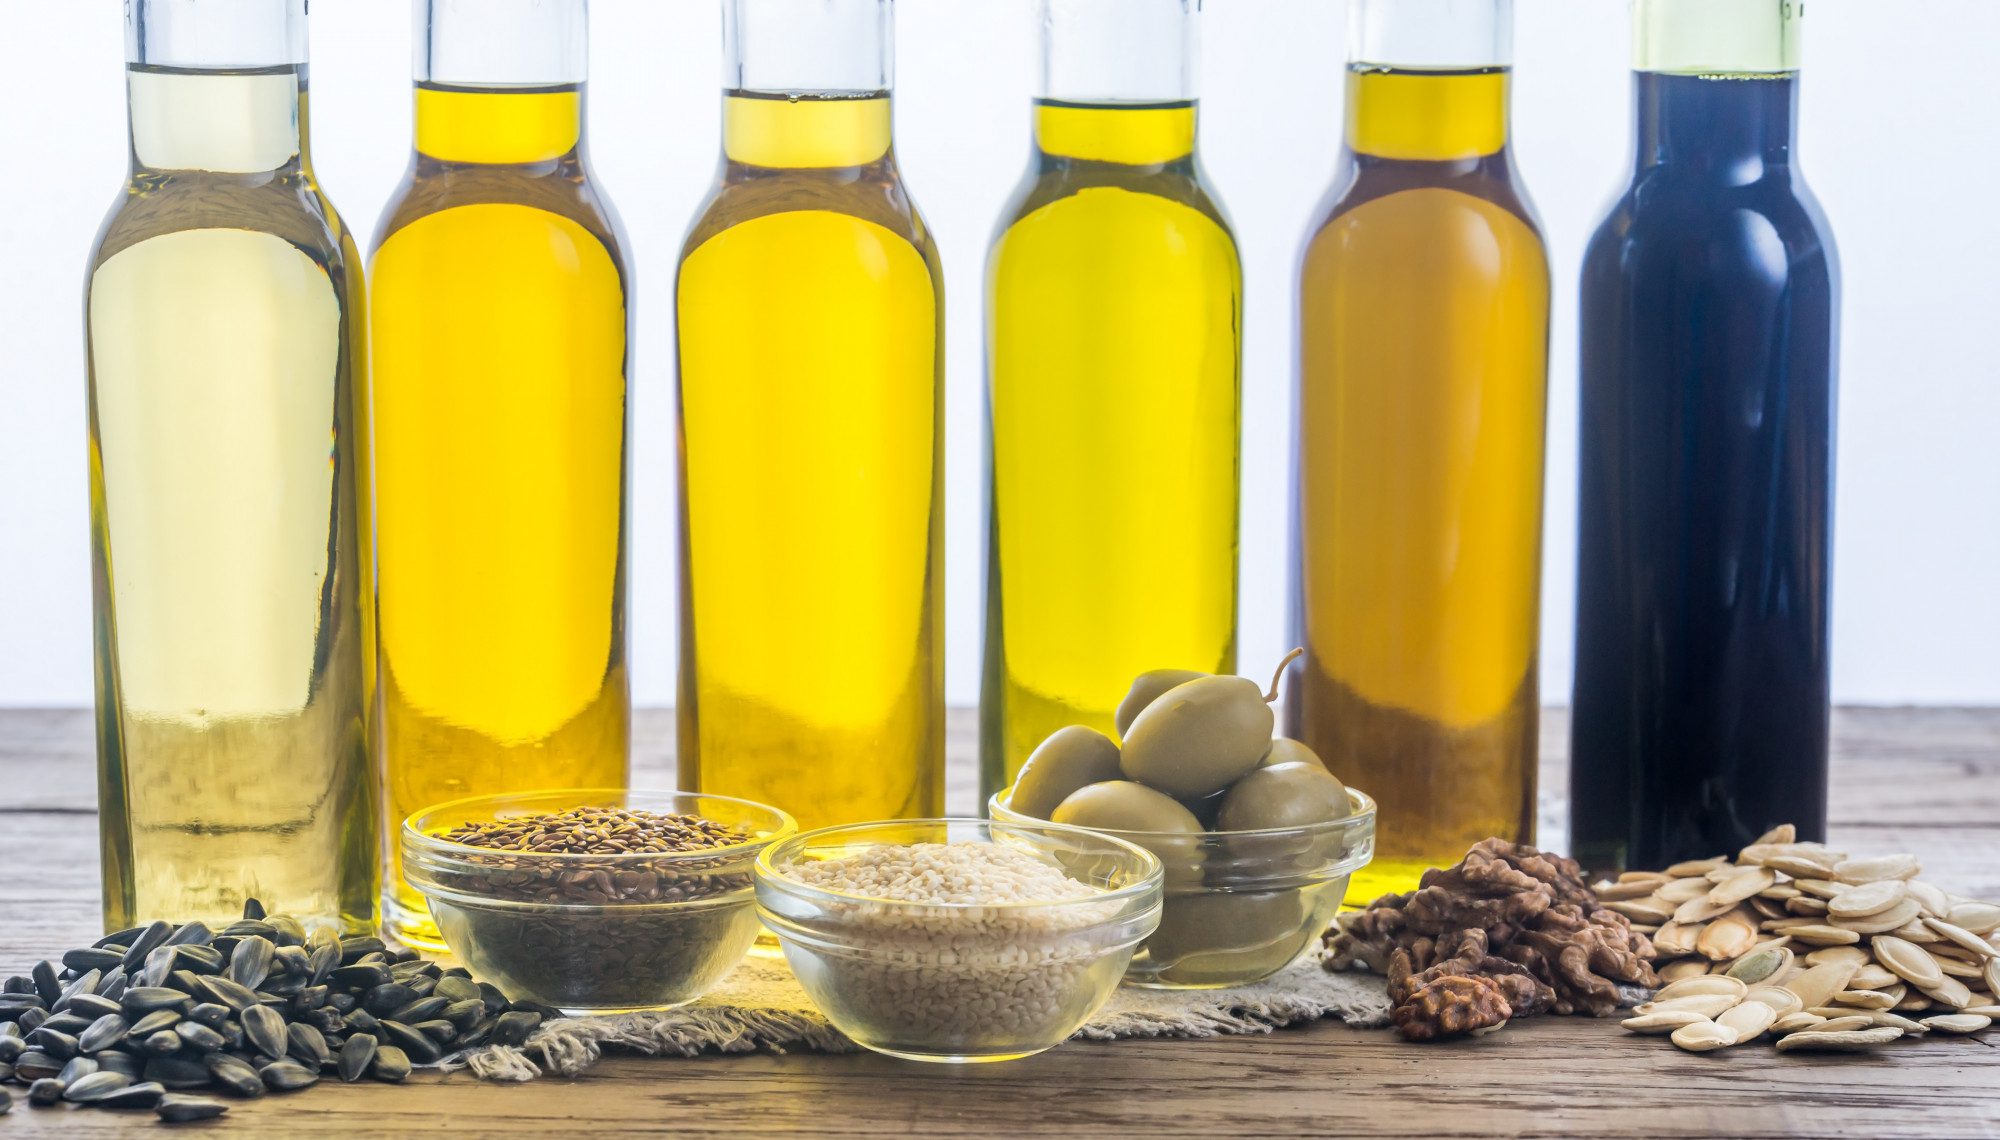 Assorted cooking oils including CanolaMAX, with seeds, grains, and olives on a wooden table against a white background.